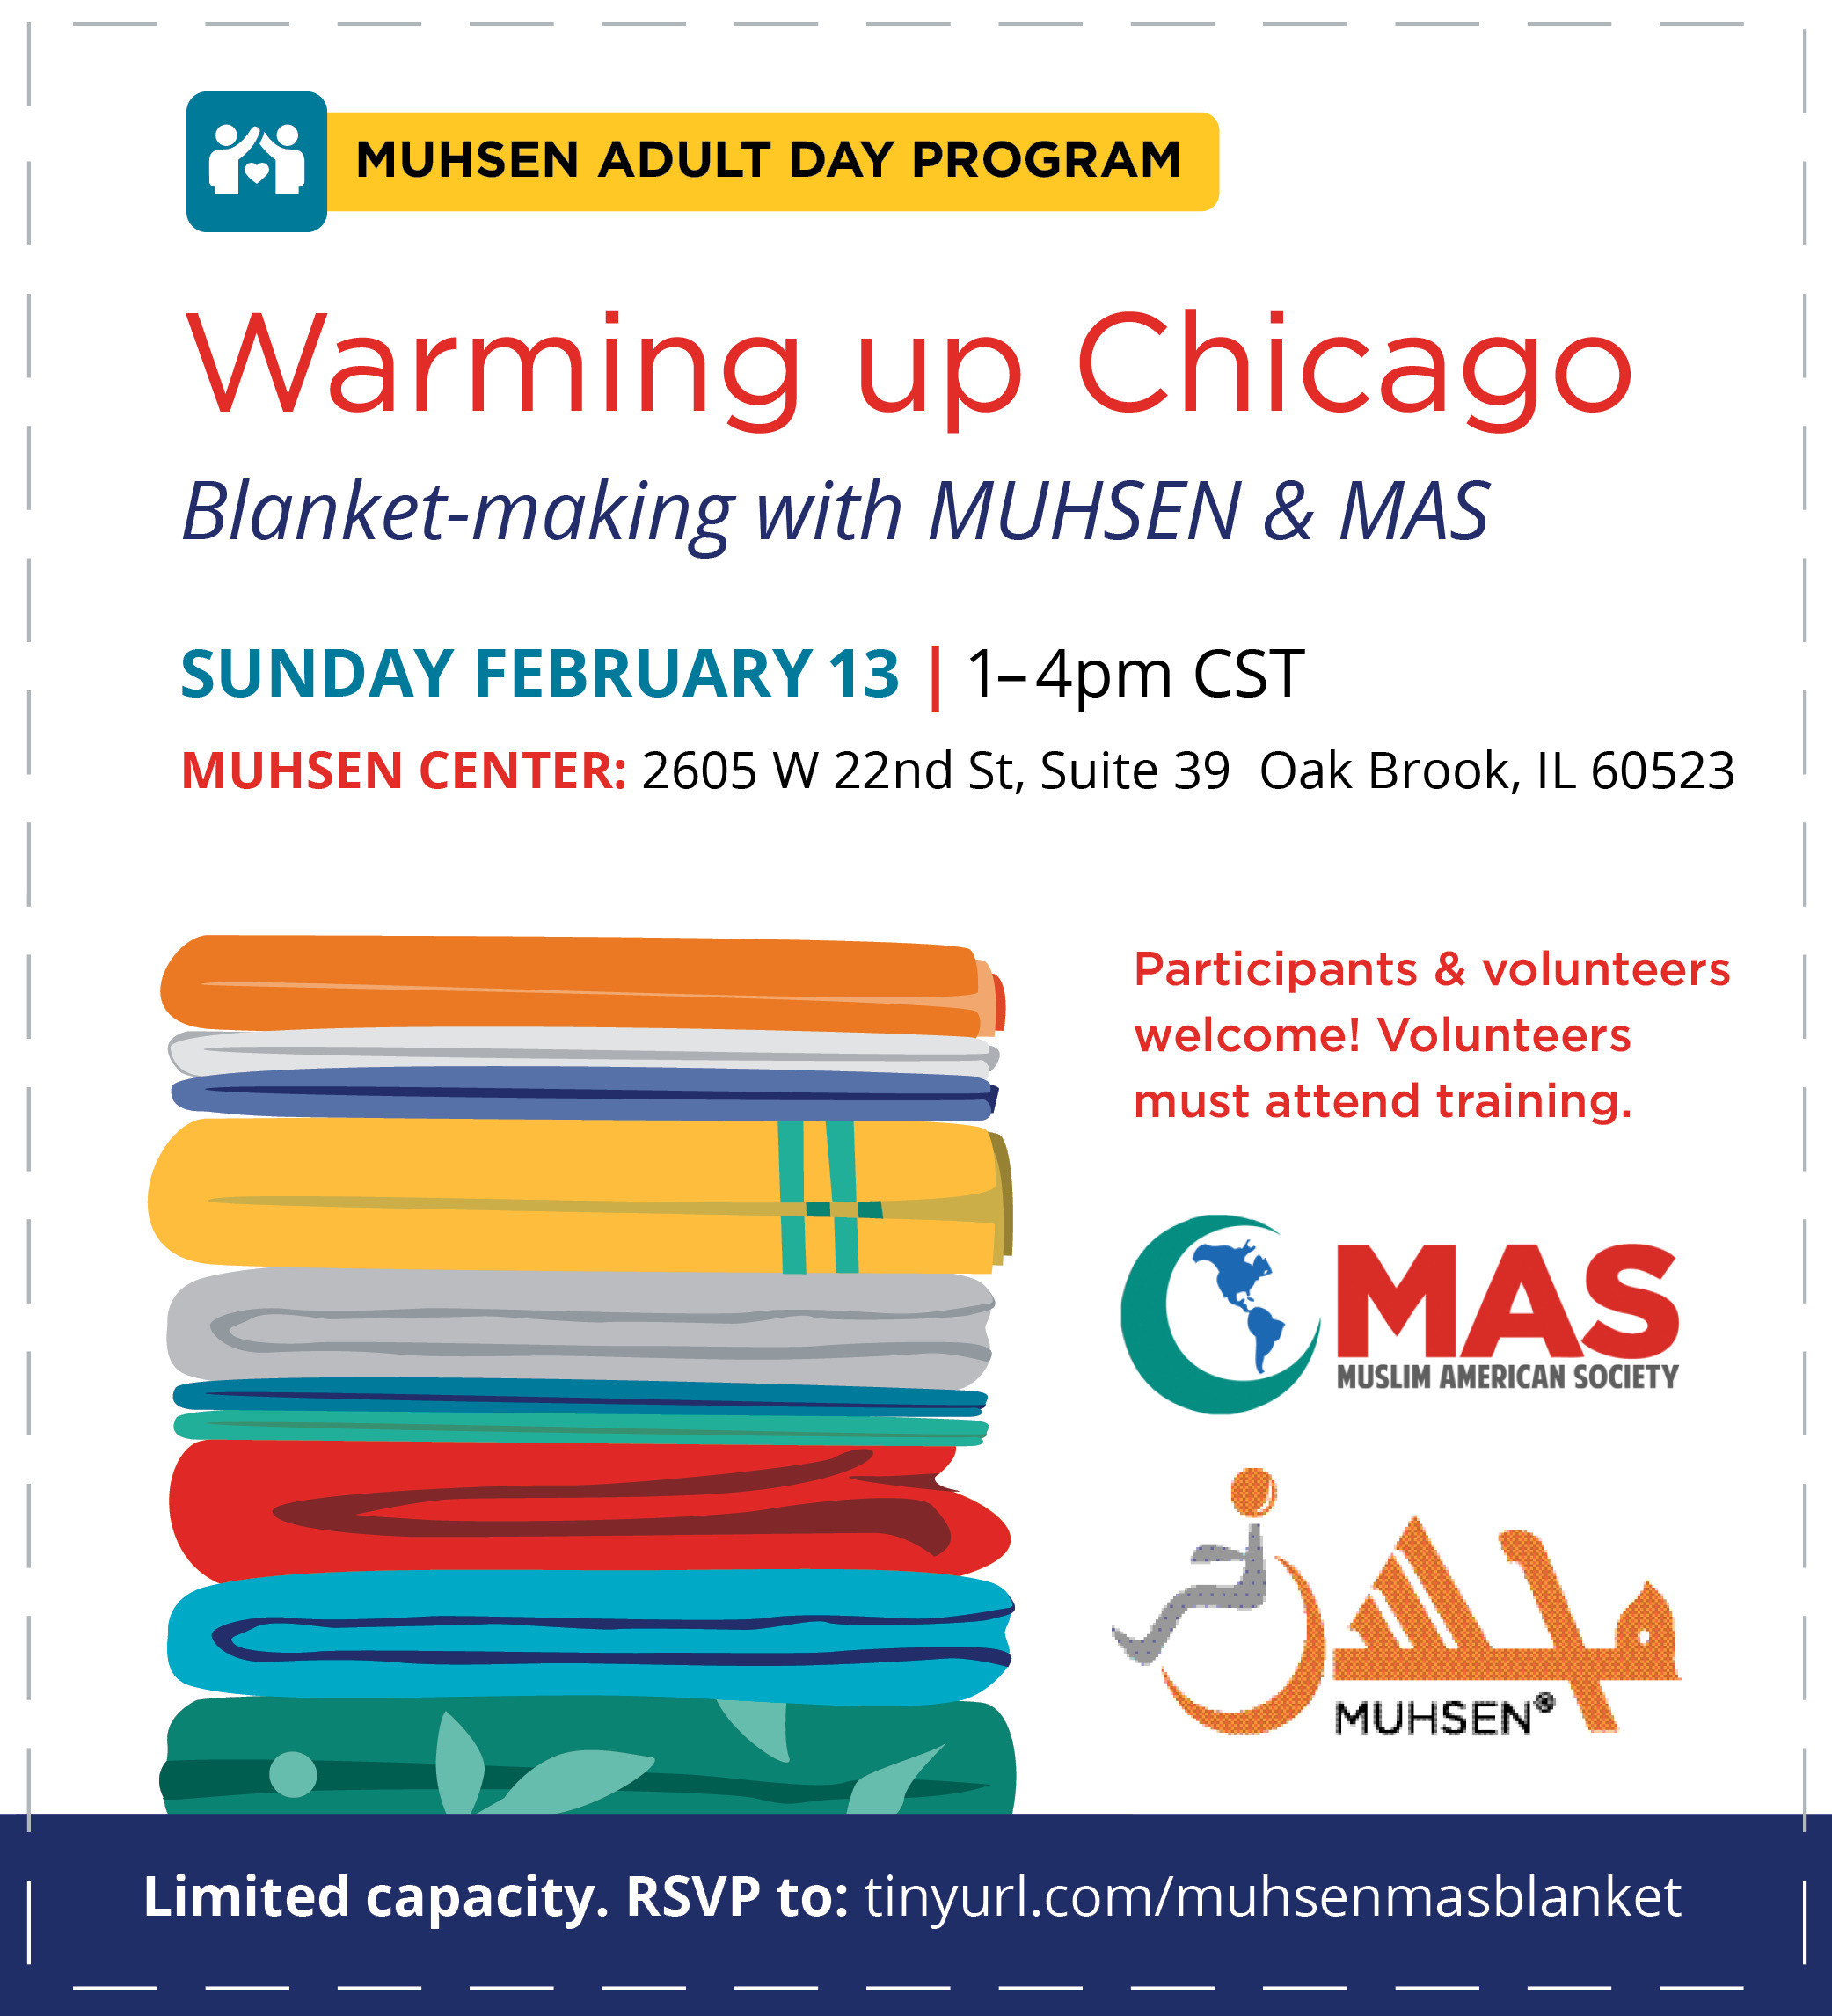 Text Reads MUHSEN Adult Day Program Warming up Chicago. Blanket-making with MUHSEN and MAS. Sunday February 13 1-4pm. Muhsen Center 2605 W 22nd St, Suite 39 Oak Brook IL 60523. Beneath to the left is a cartoon image of a stack of blankets. To the right is text that reads Participants and volunteers welcome! Volunteers must attend training. Beneath is a MAS logo and a Muhsen logo. At the bottom is a blue text box that reads Limited capacity. RSVP to tinyurl.com/muhsenmasblanket